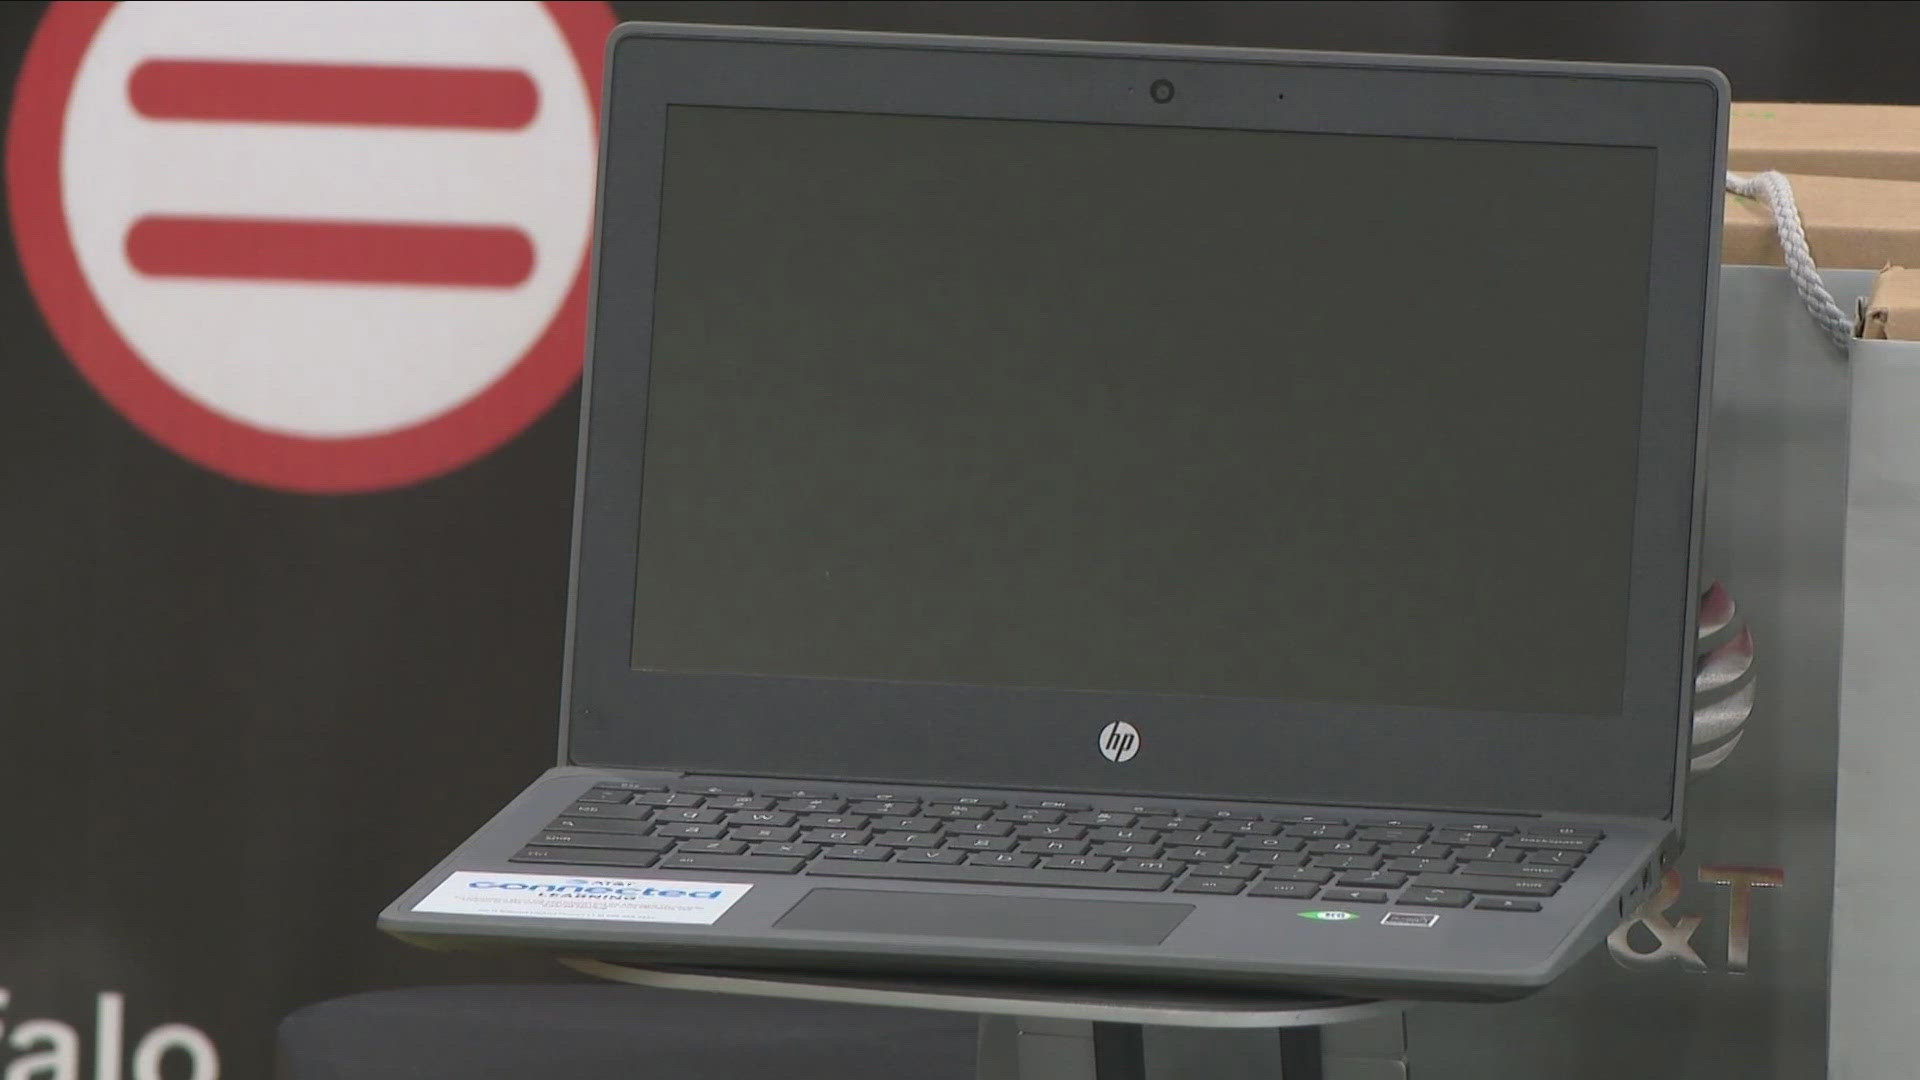 Today 100 new laptops were distributed to 10 local organizations on Buffalo's West Side.